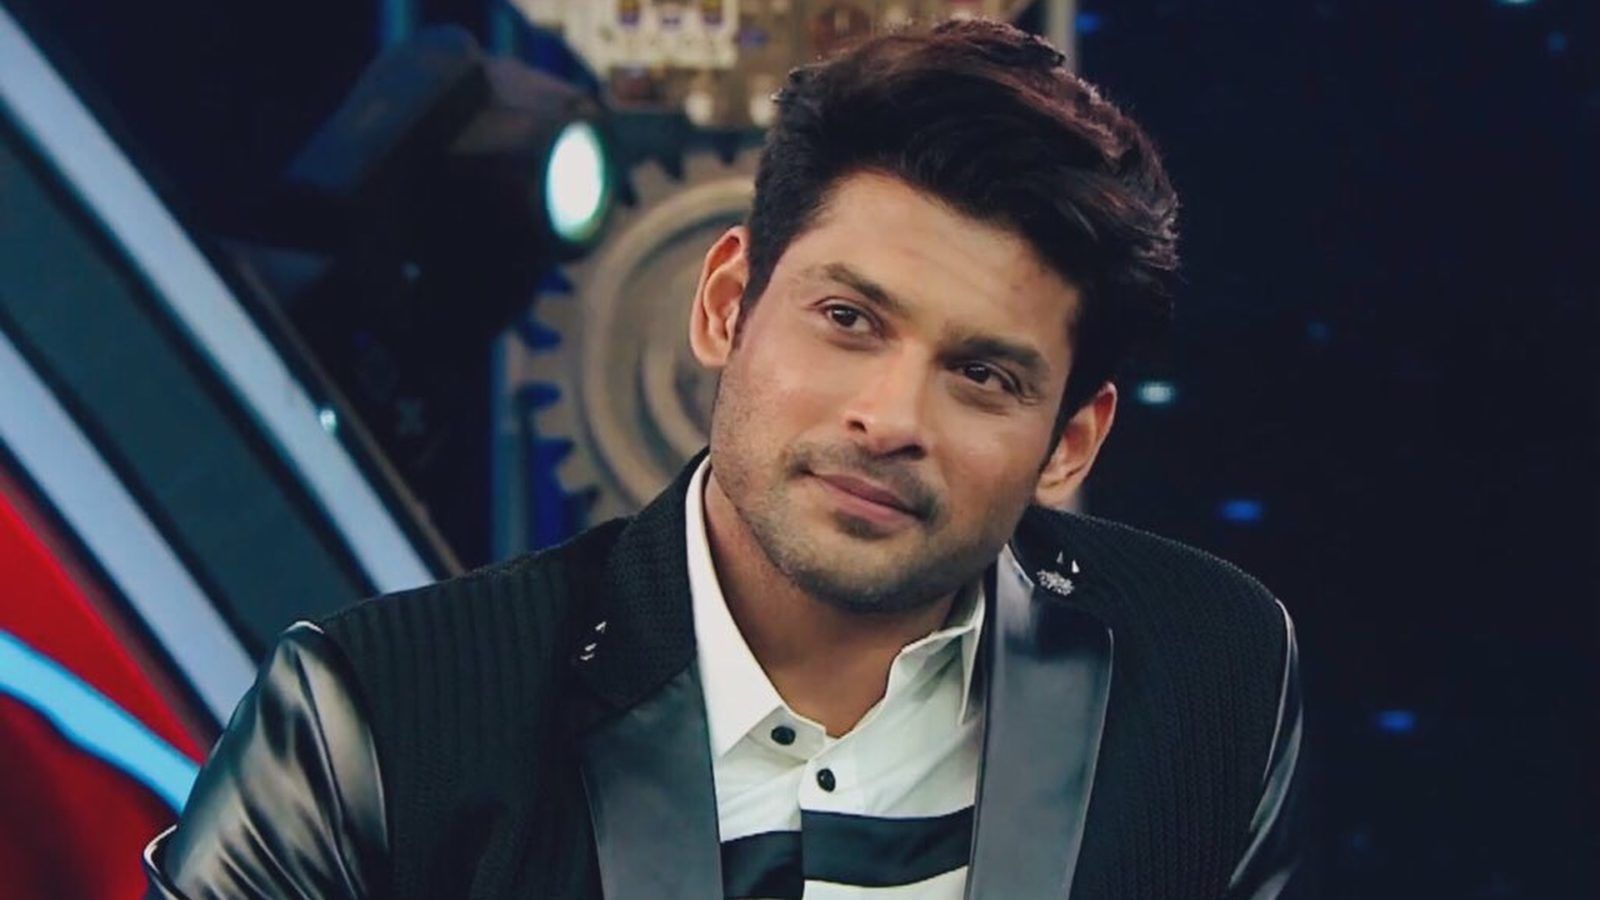 All the shows and movies starring Sidharth Shukla you need to know